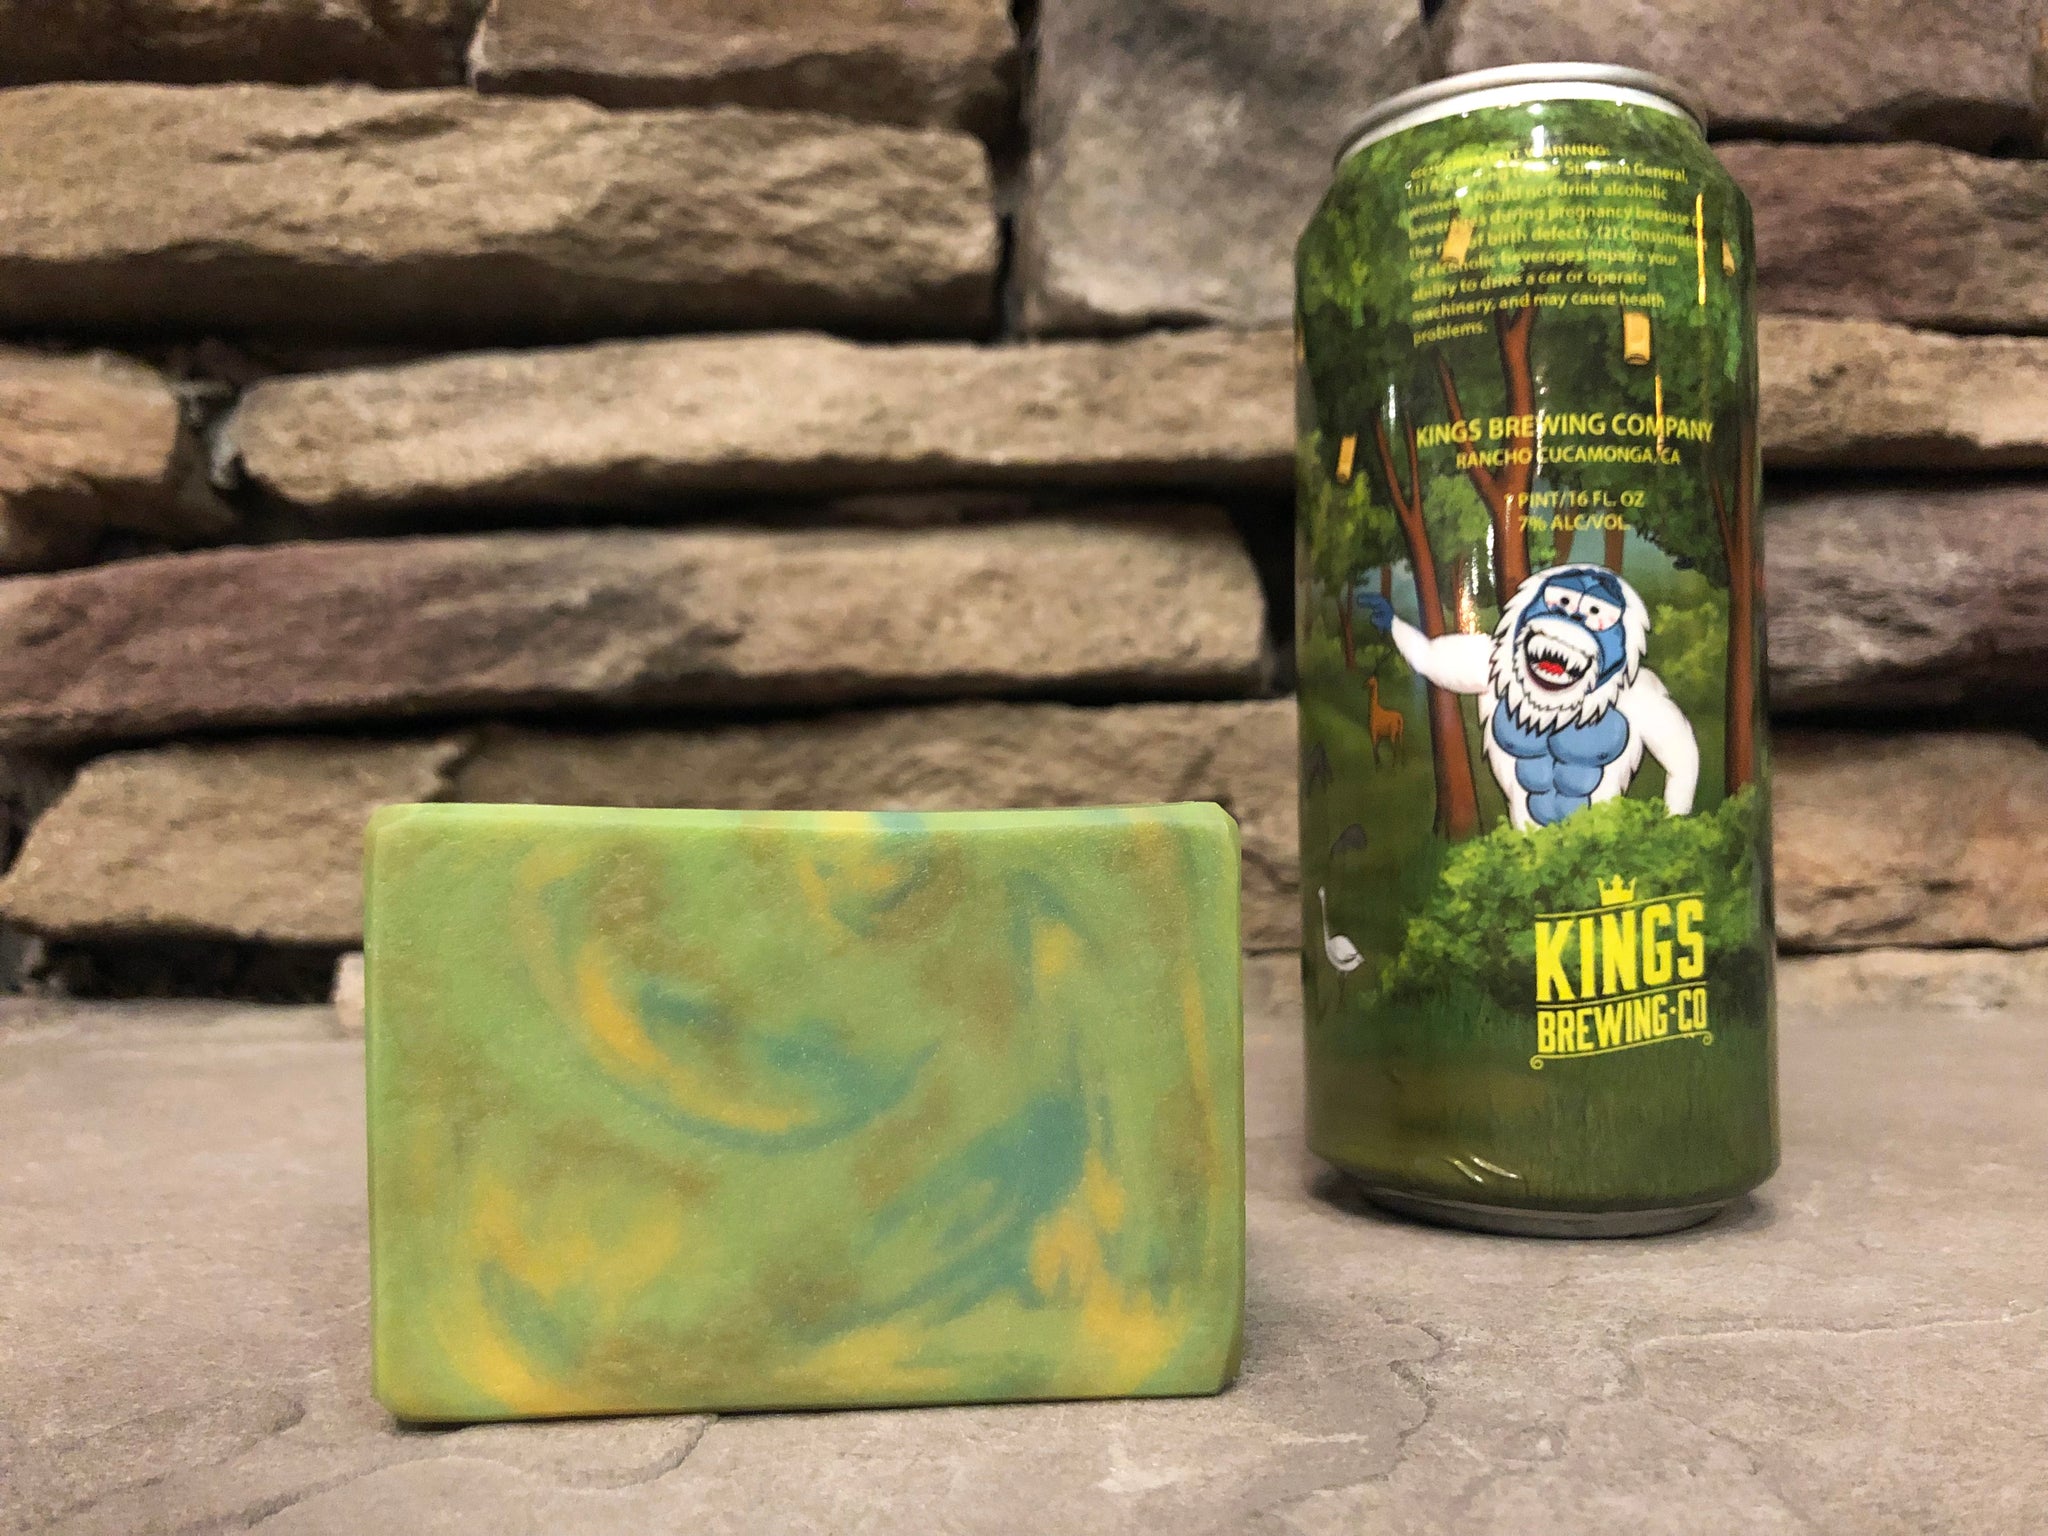 terp slerp frose beer soap by spunkndisorderly craft beer soaps made with terp slerp frose from kings brewing company Rancho Cucamonga California craft brewery green yellow and blue beer soap